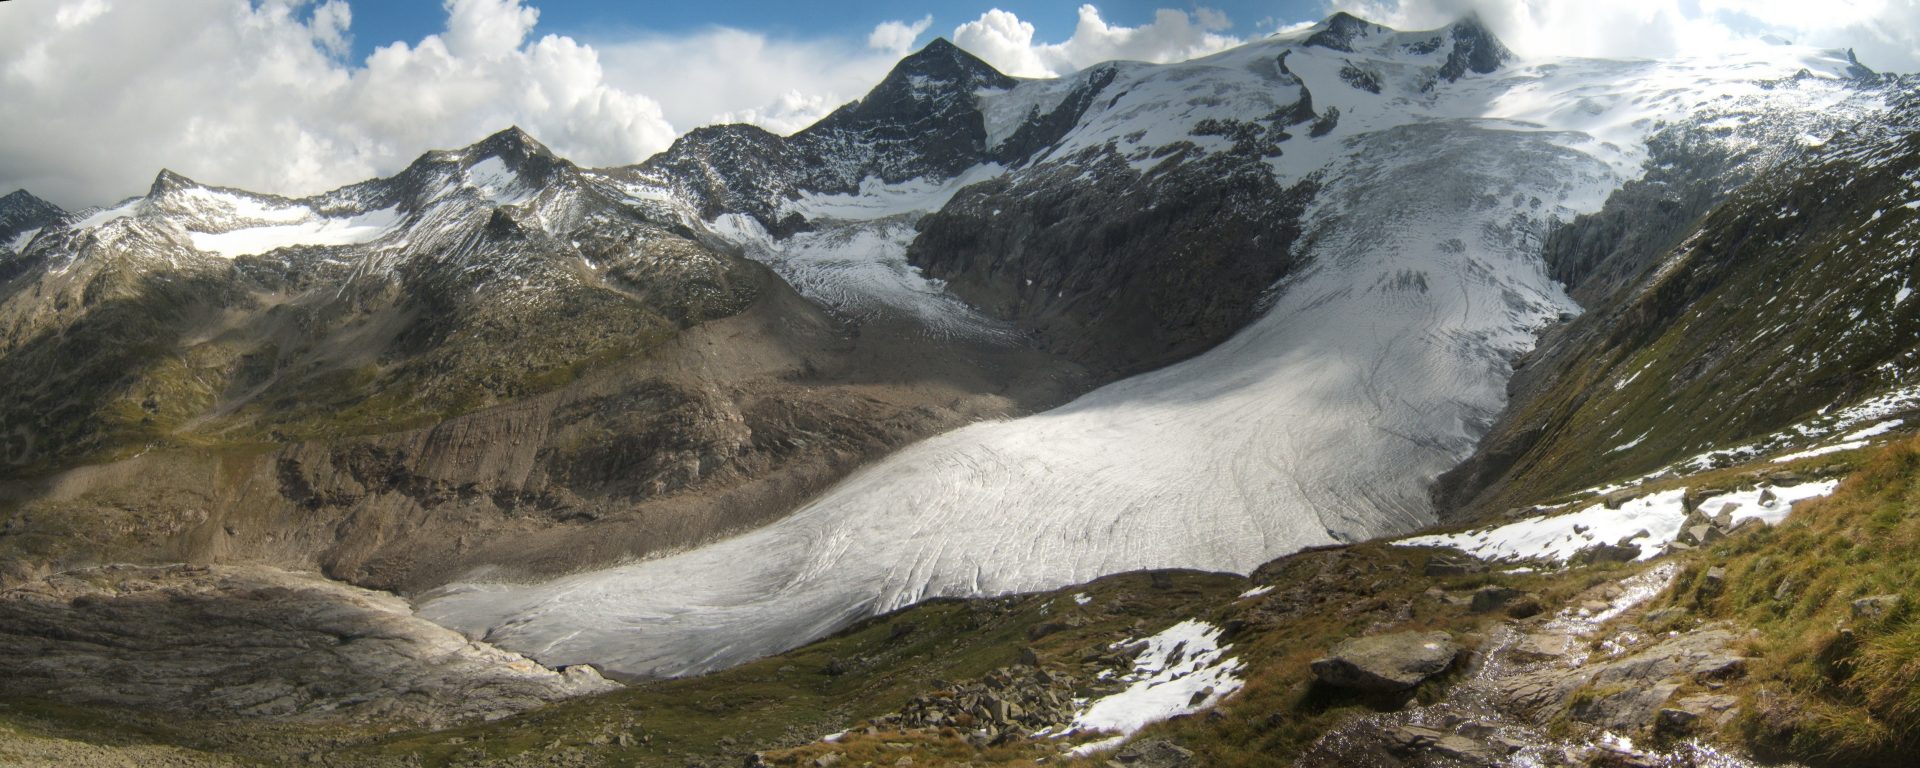 The Schlatenkees Glacier has severly retreated over the years. Photo Credit: Wikipedia Glaciers